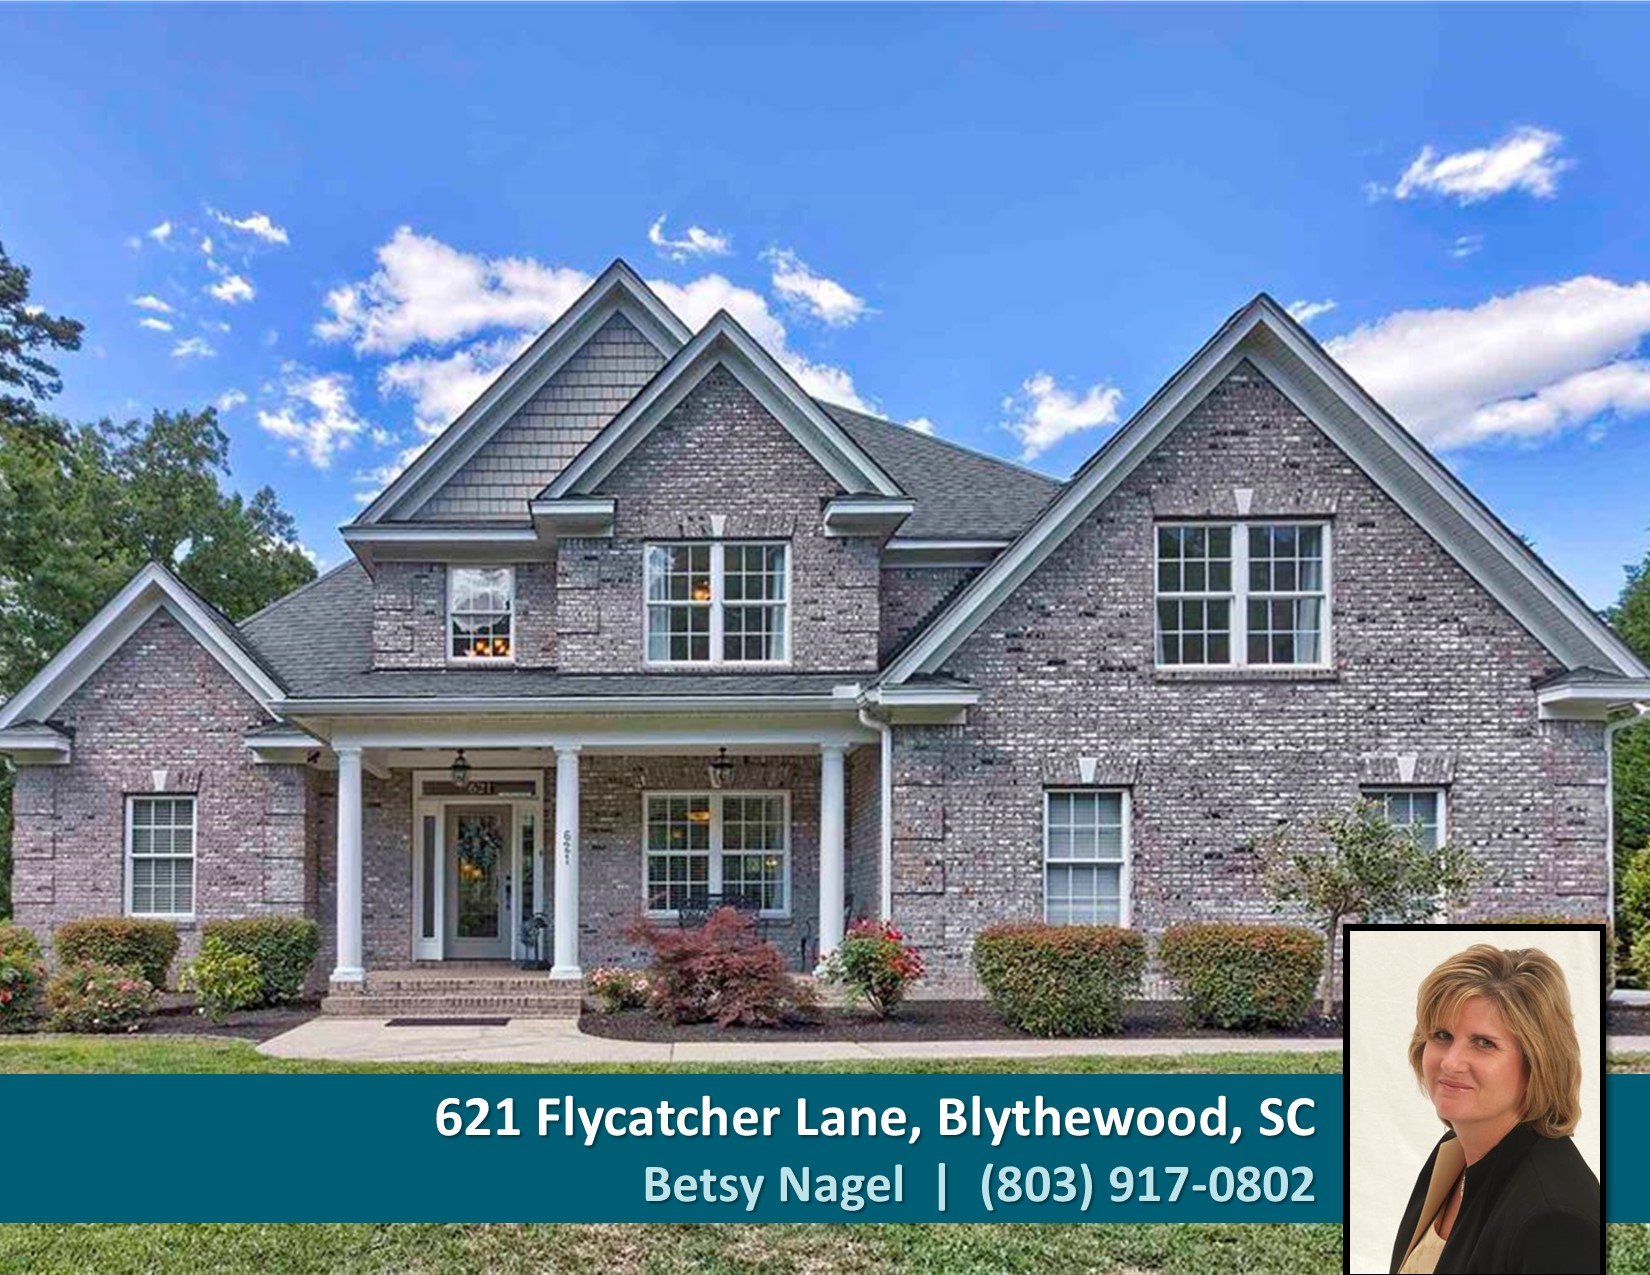 Just listed in Longcreek Crescent Lake - Blythewood